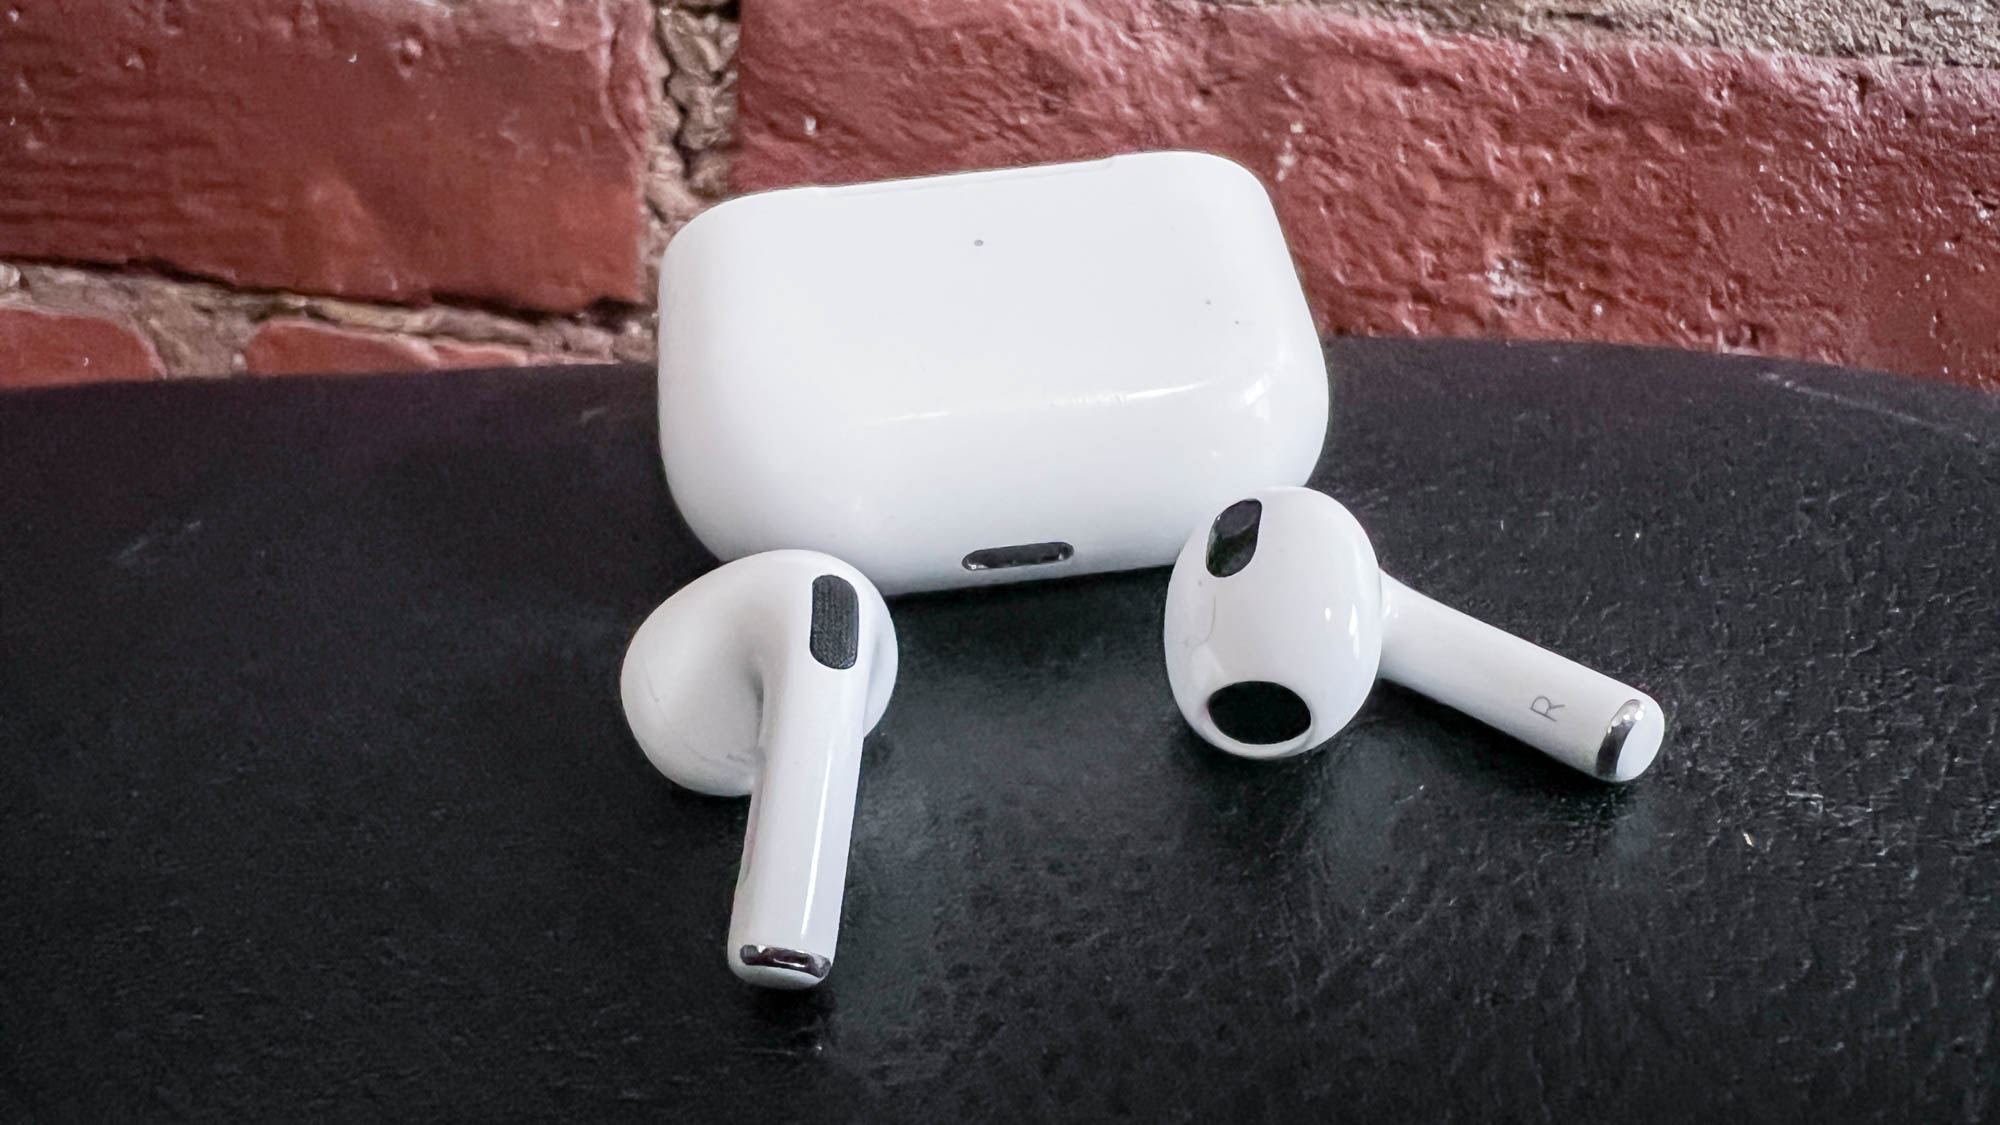 Apple AirPods 3 with charging on a black leather surface against a brick wall backgound